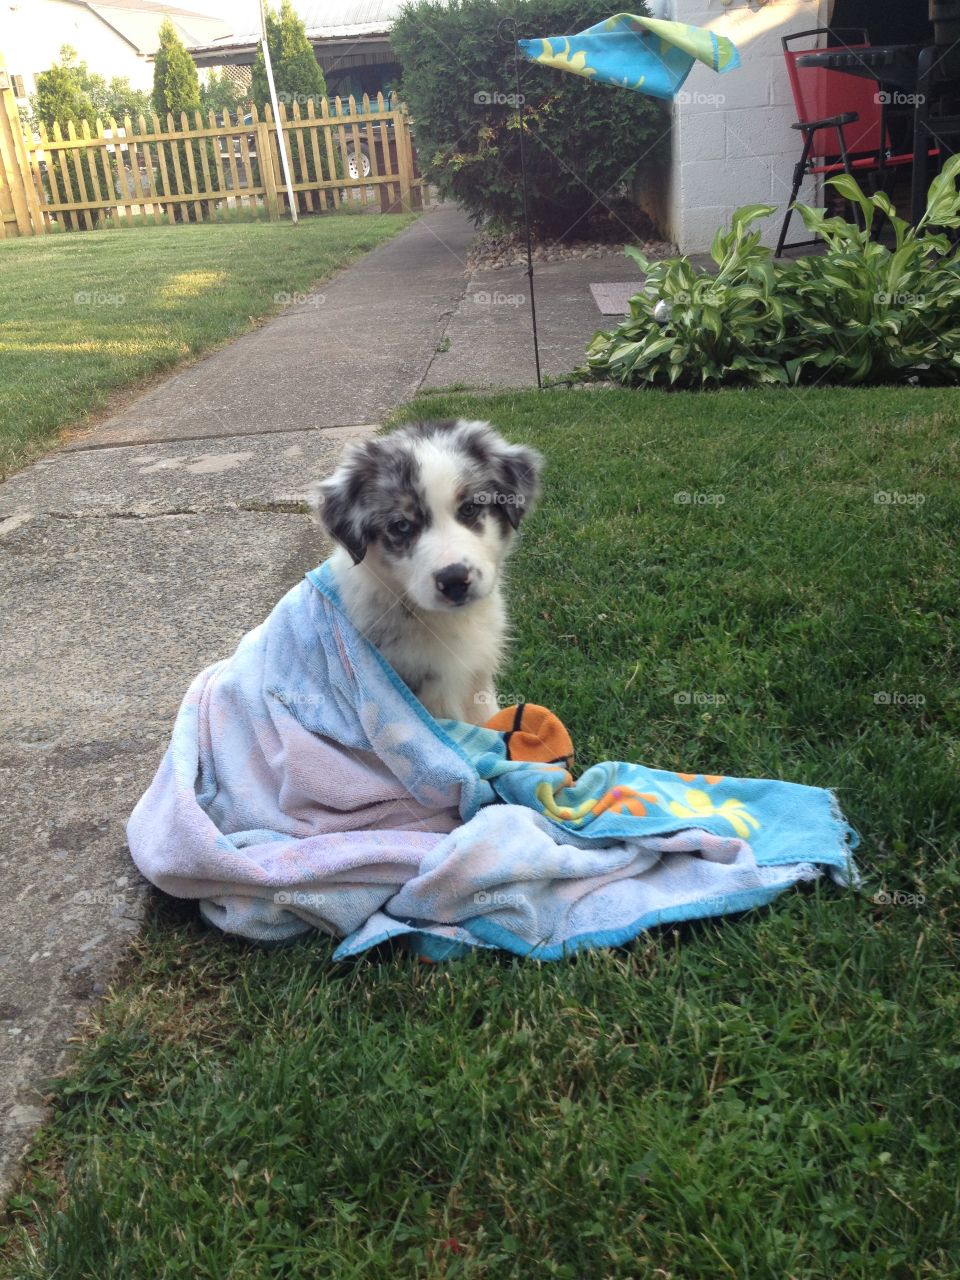 Mcgee. Drying off after pool